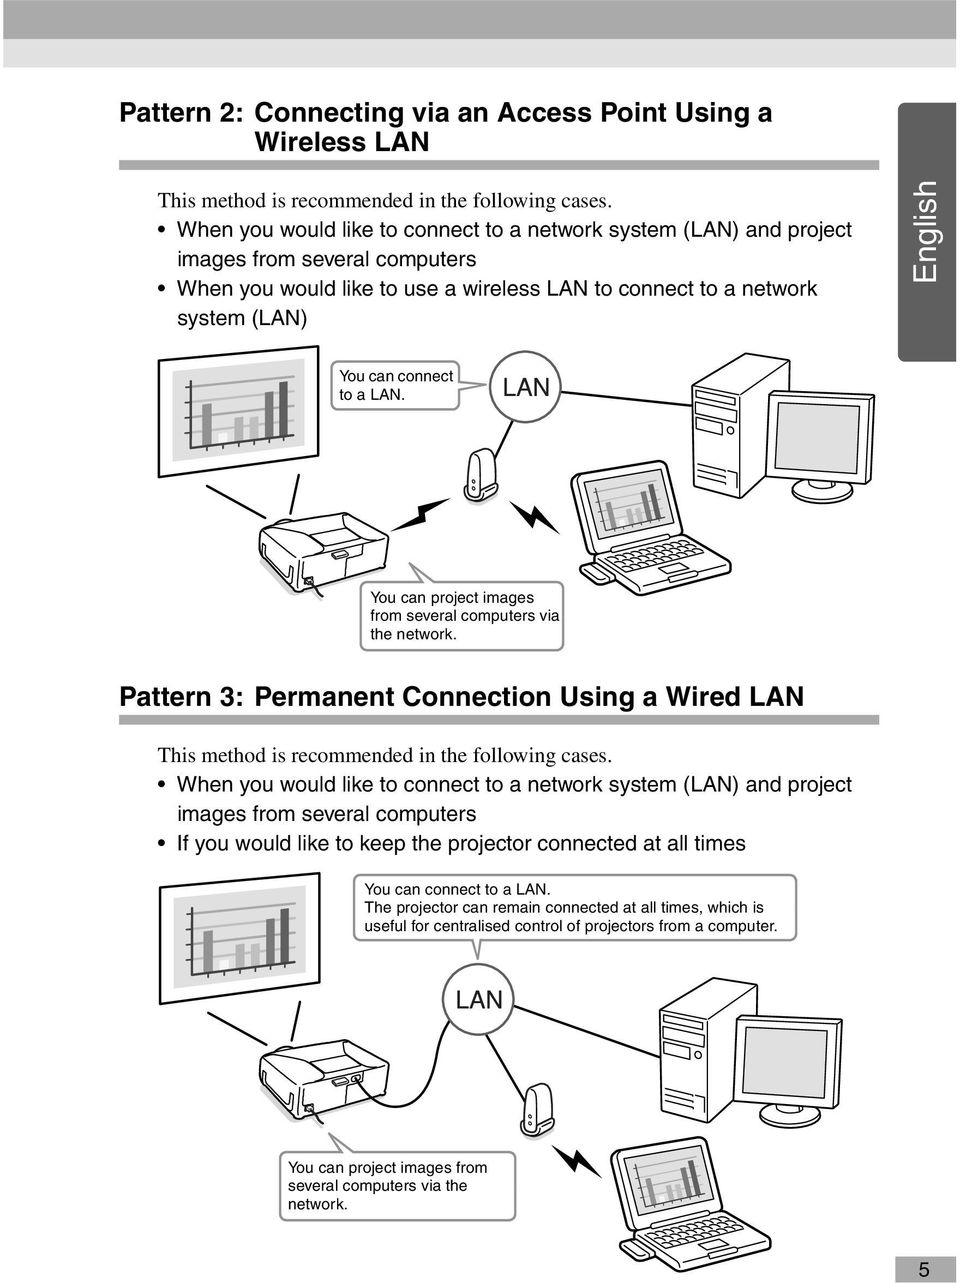 connect to a LAN. You can project images from several computers via the network. Pattern 3: Permanent Connection Using a Wired LAN This method is recommended in the following cases.